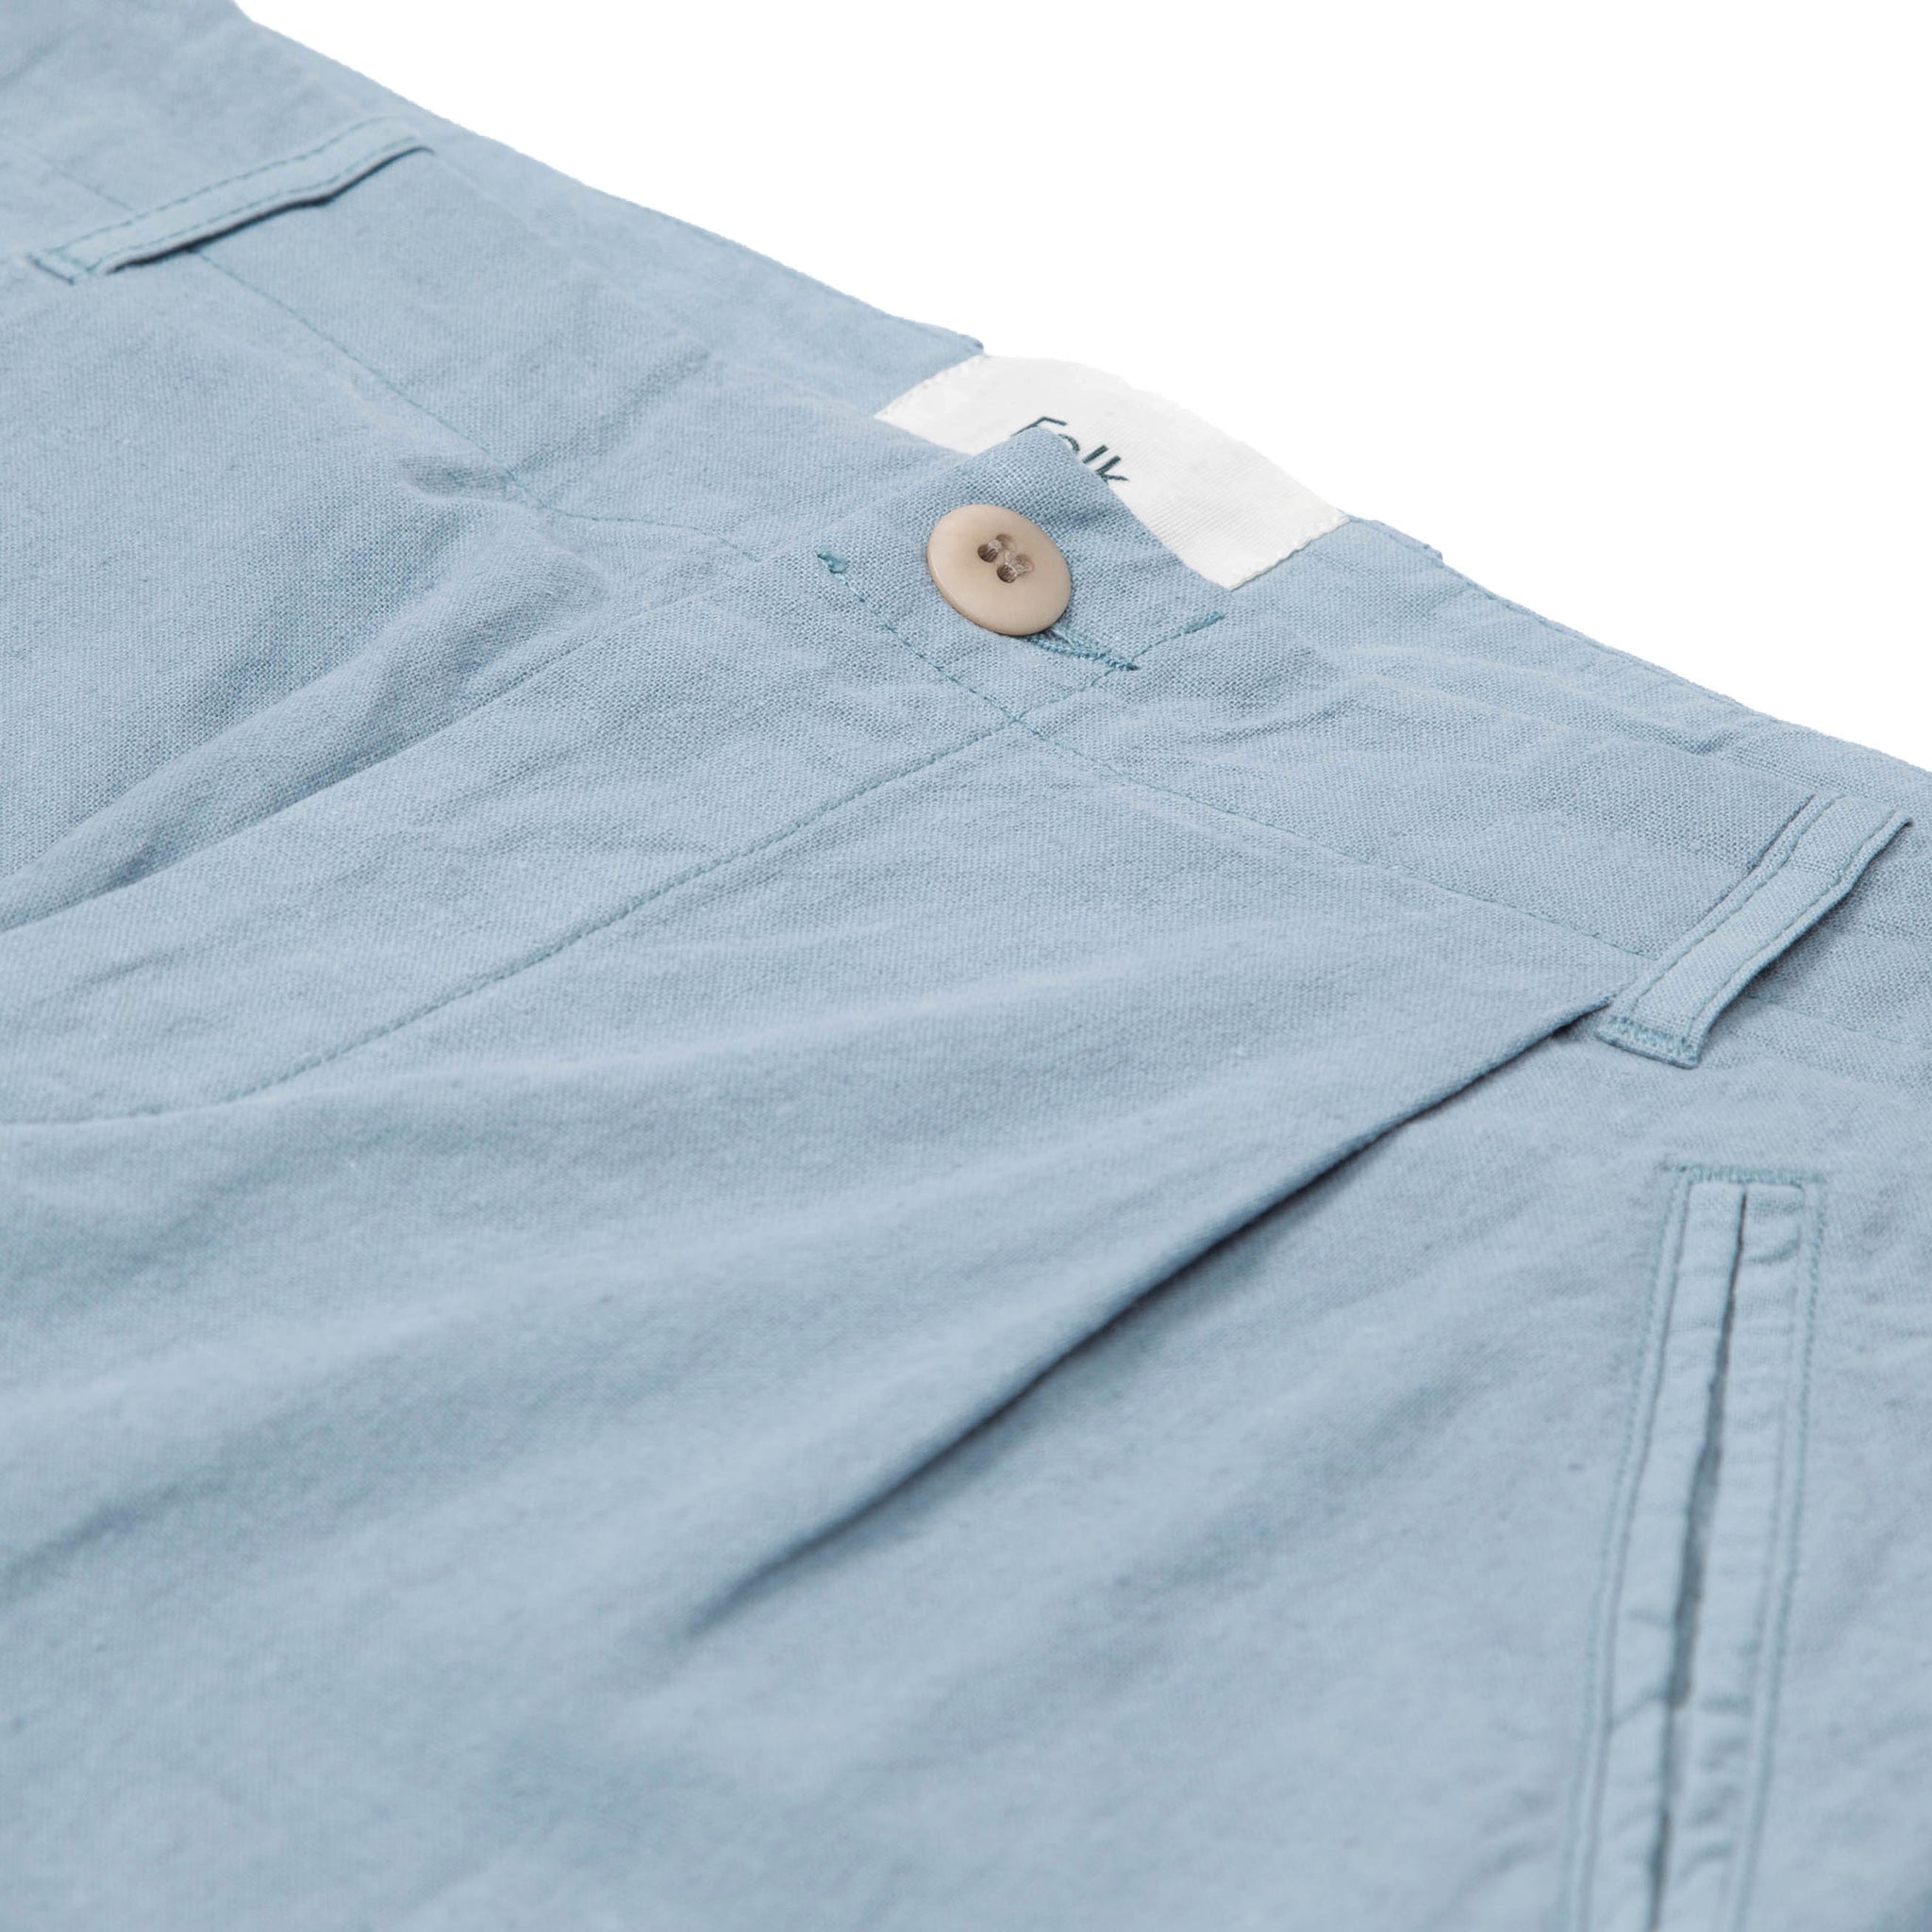 Assembly Pant - Woad Linen